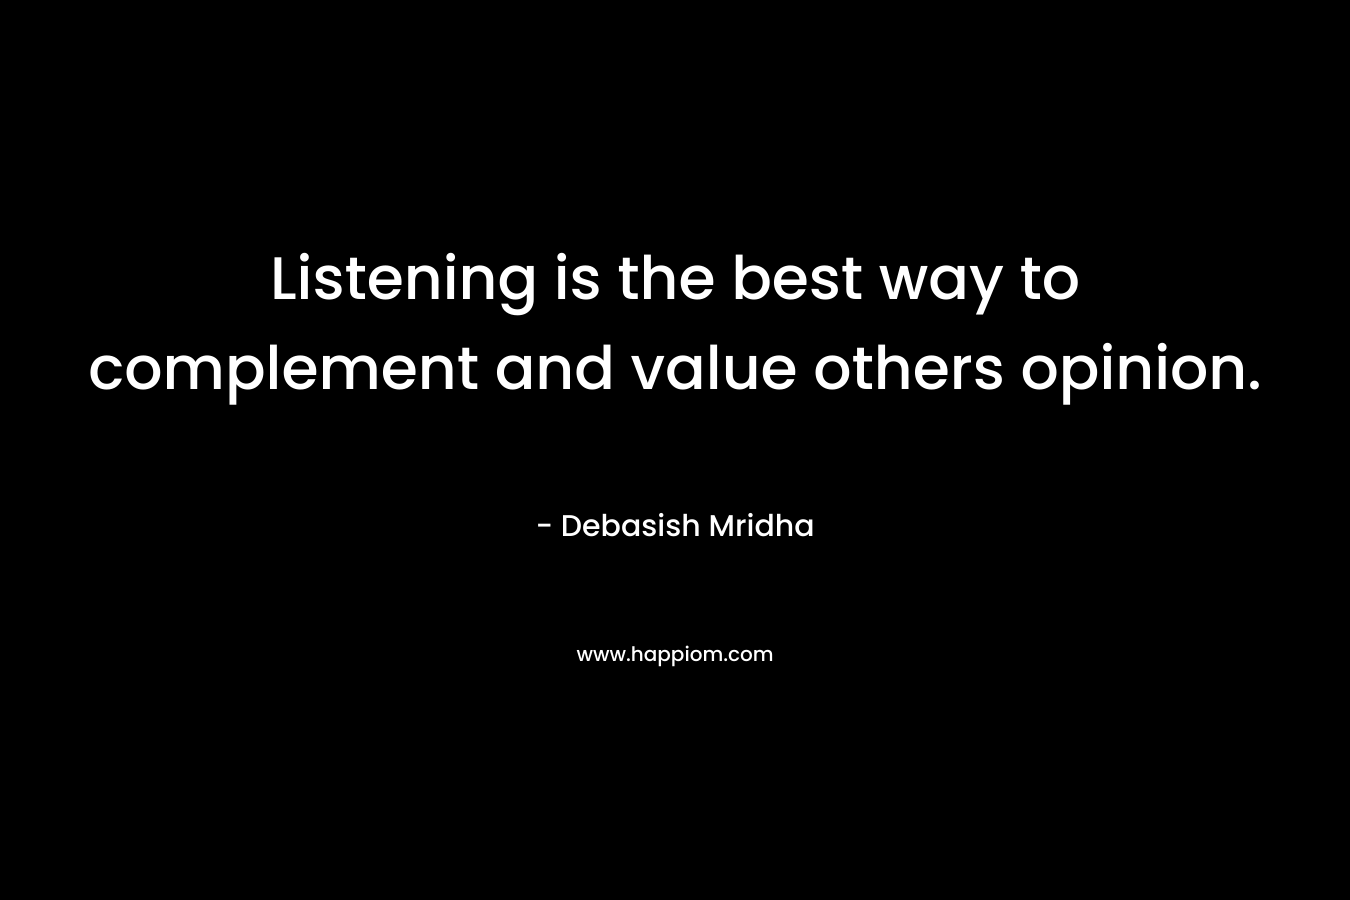 Listening is the best way to complement and value others opinion. – Debasish Mridha